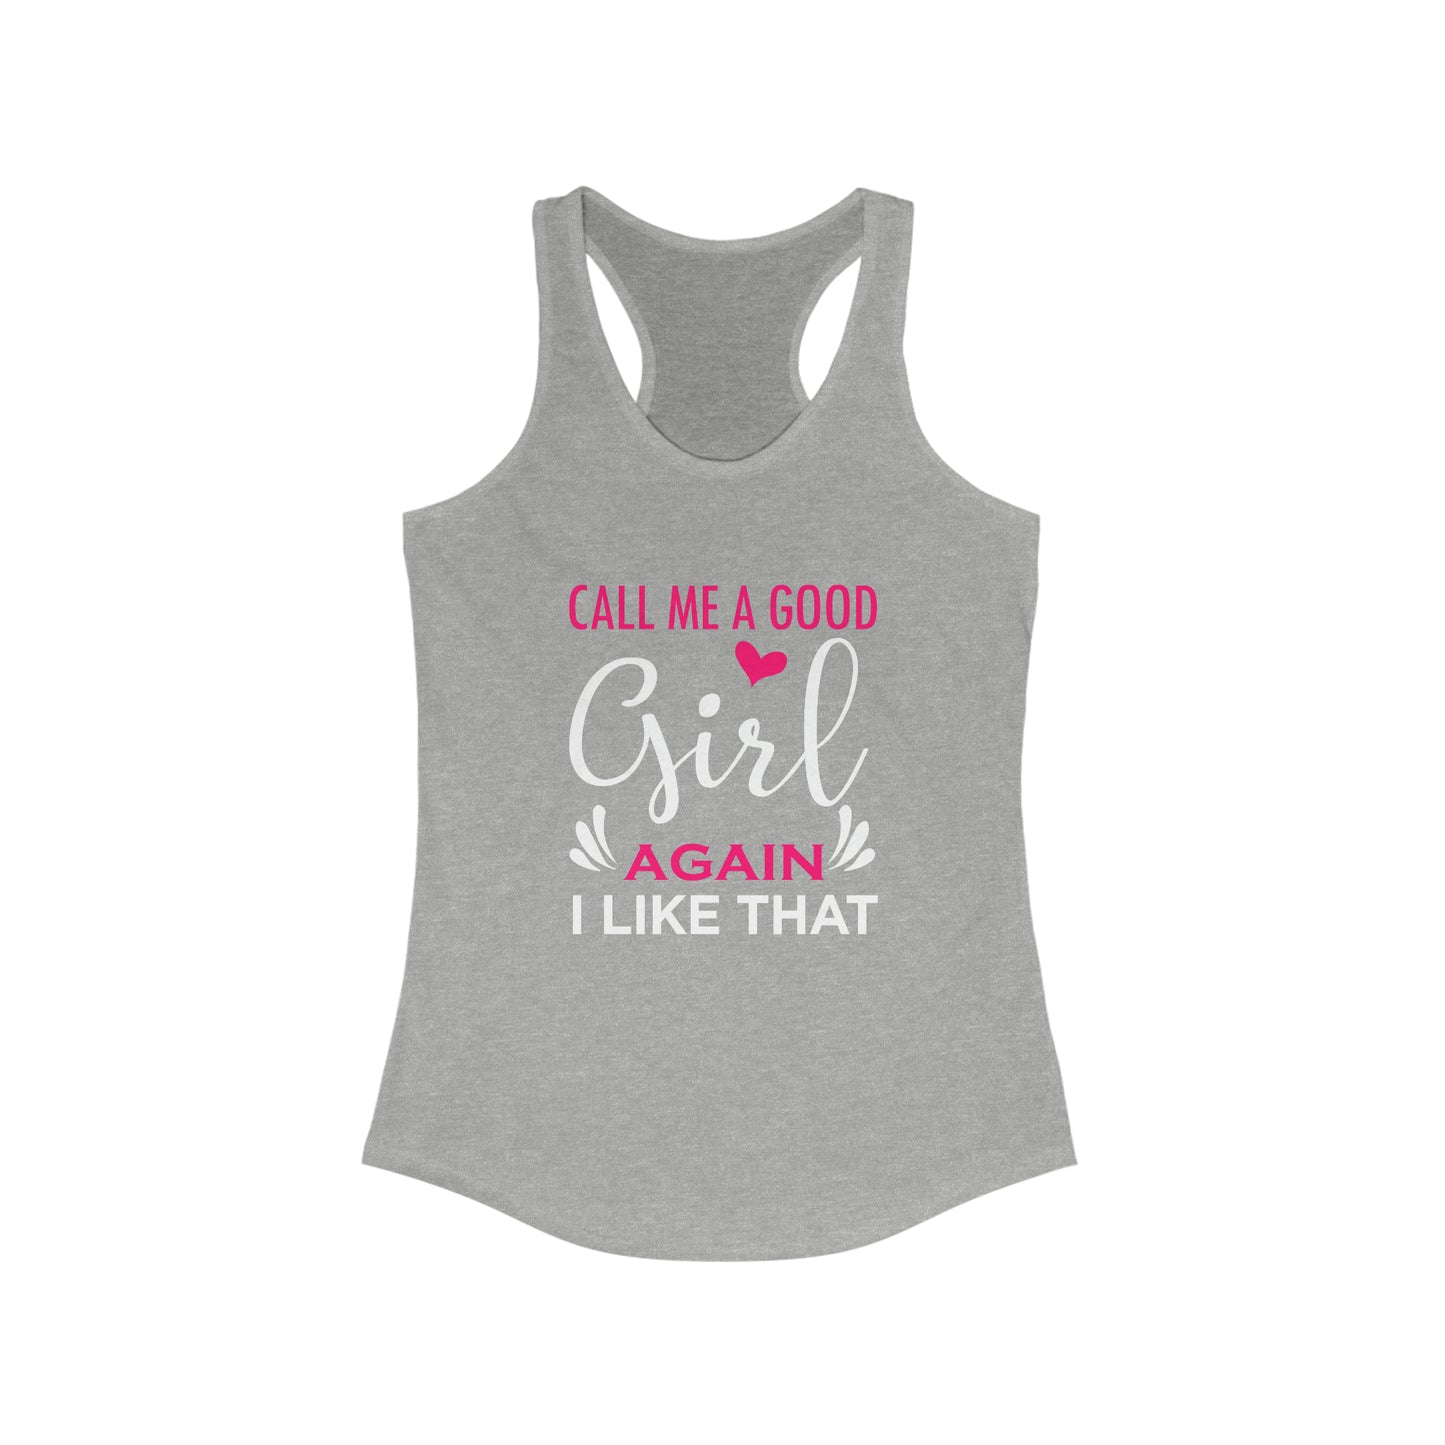 Call Me A Good Girl Again I Like That Women's Ideal Racerback Tank for fitness gym & every day wear